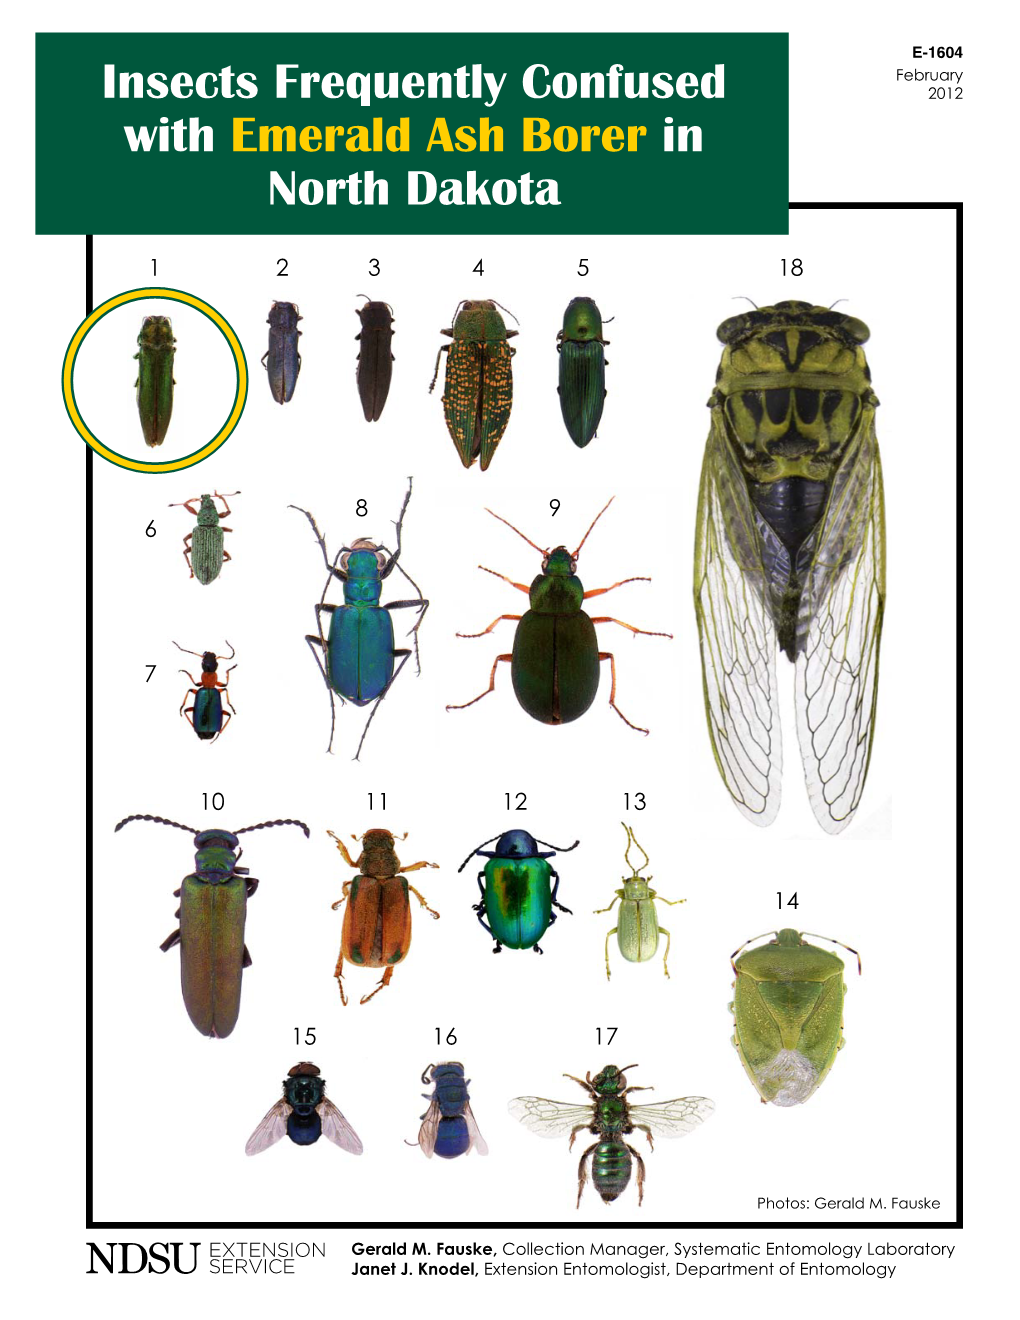 Insects Frequently Confused with Emerald Ash Borer in North Dakota